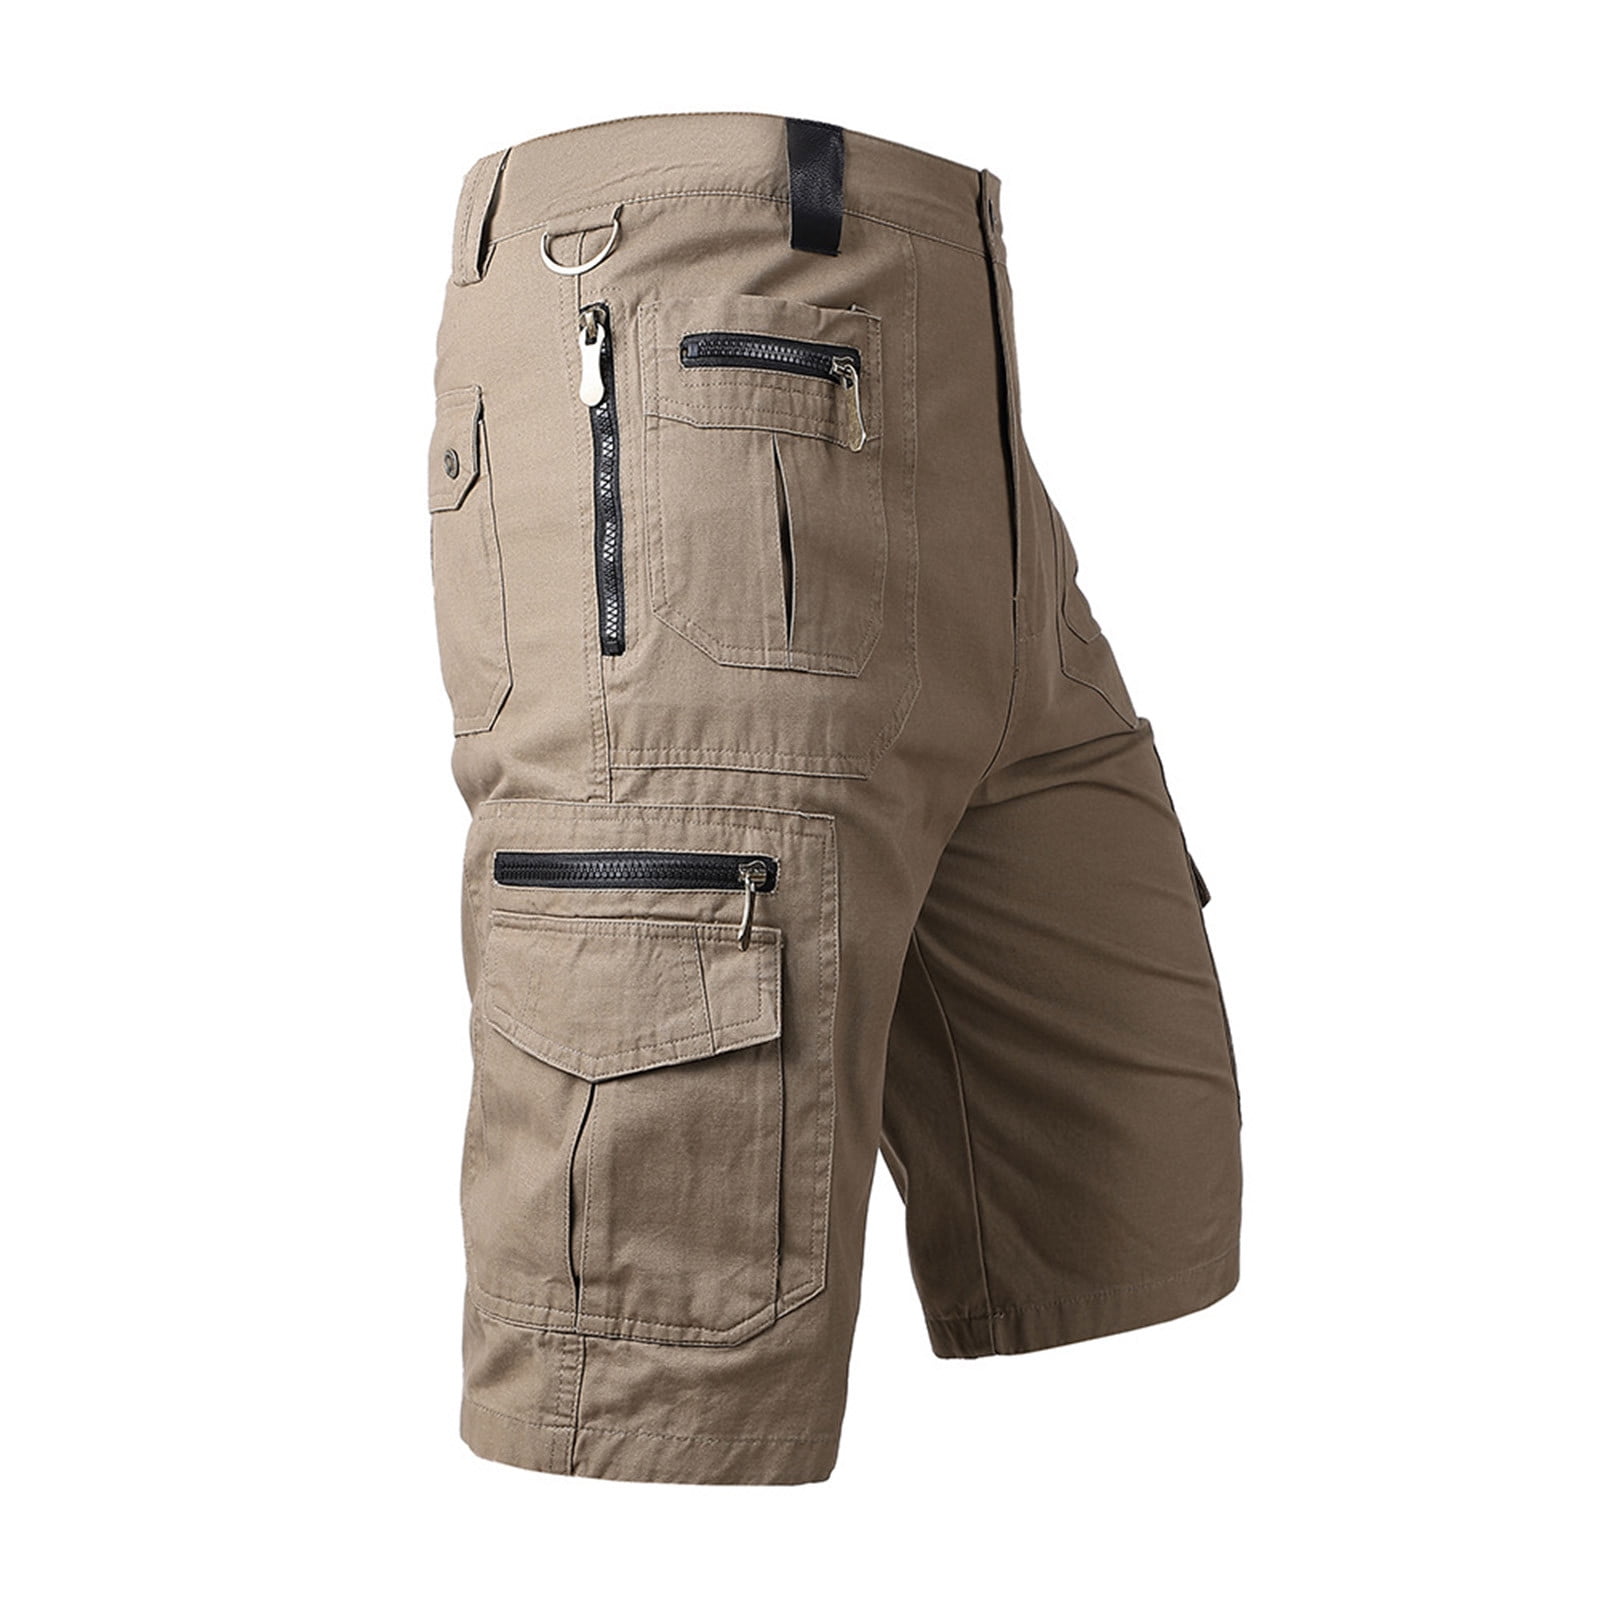 APEXFWDT Cargo Shorts for Men Big and Tall Camo Outdoor Military